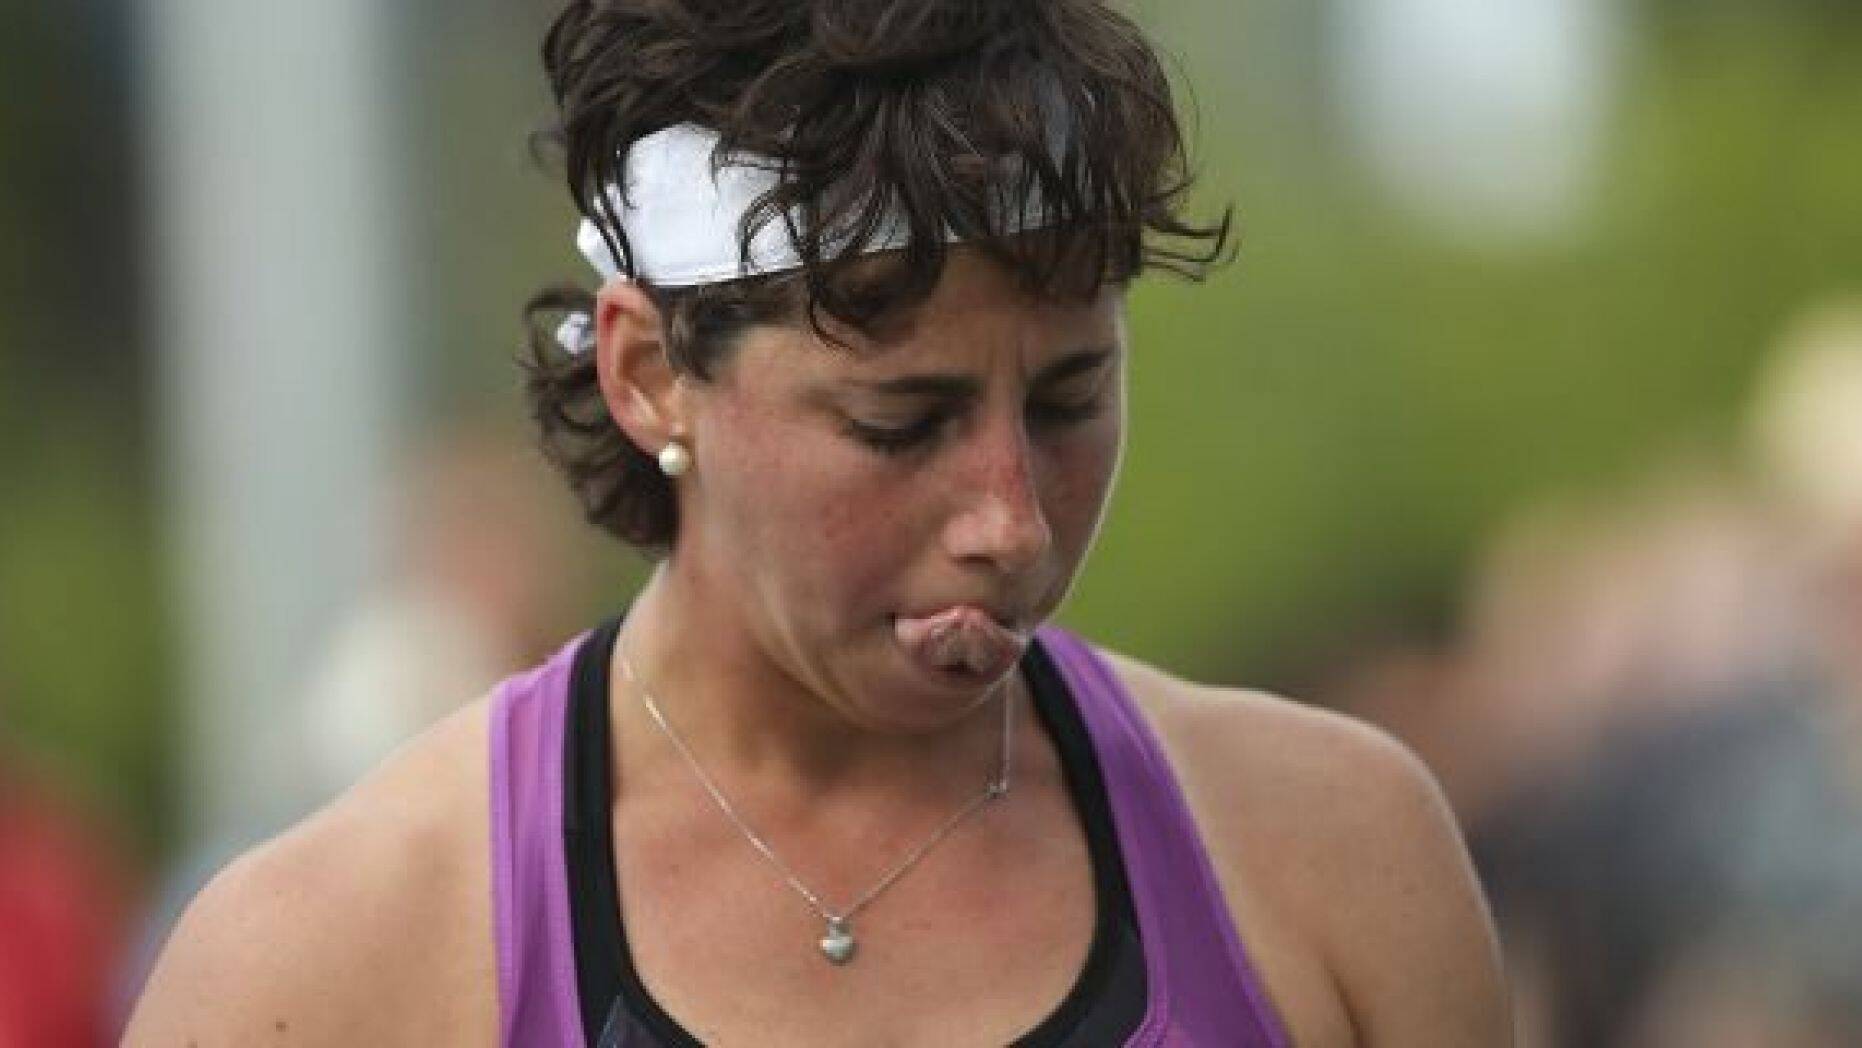 Carla Suarez Navarro, of Spain, reacts after losing a point to Timea Babos, of Hungary, during the first round of the US Open tennis tournament Tuesday, Aug. 27, 2019, in New York. (AP Photo/Eduardo Munoz Alvarez)